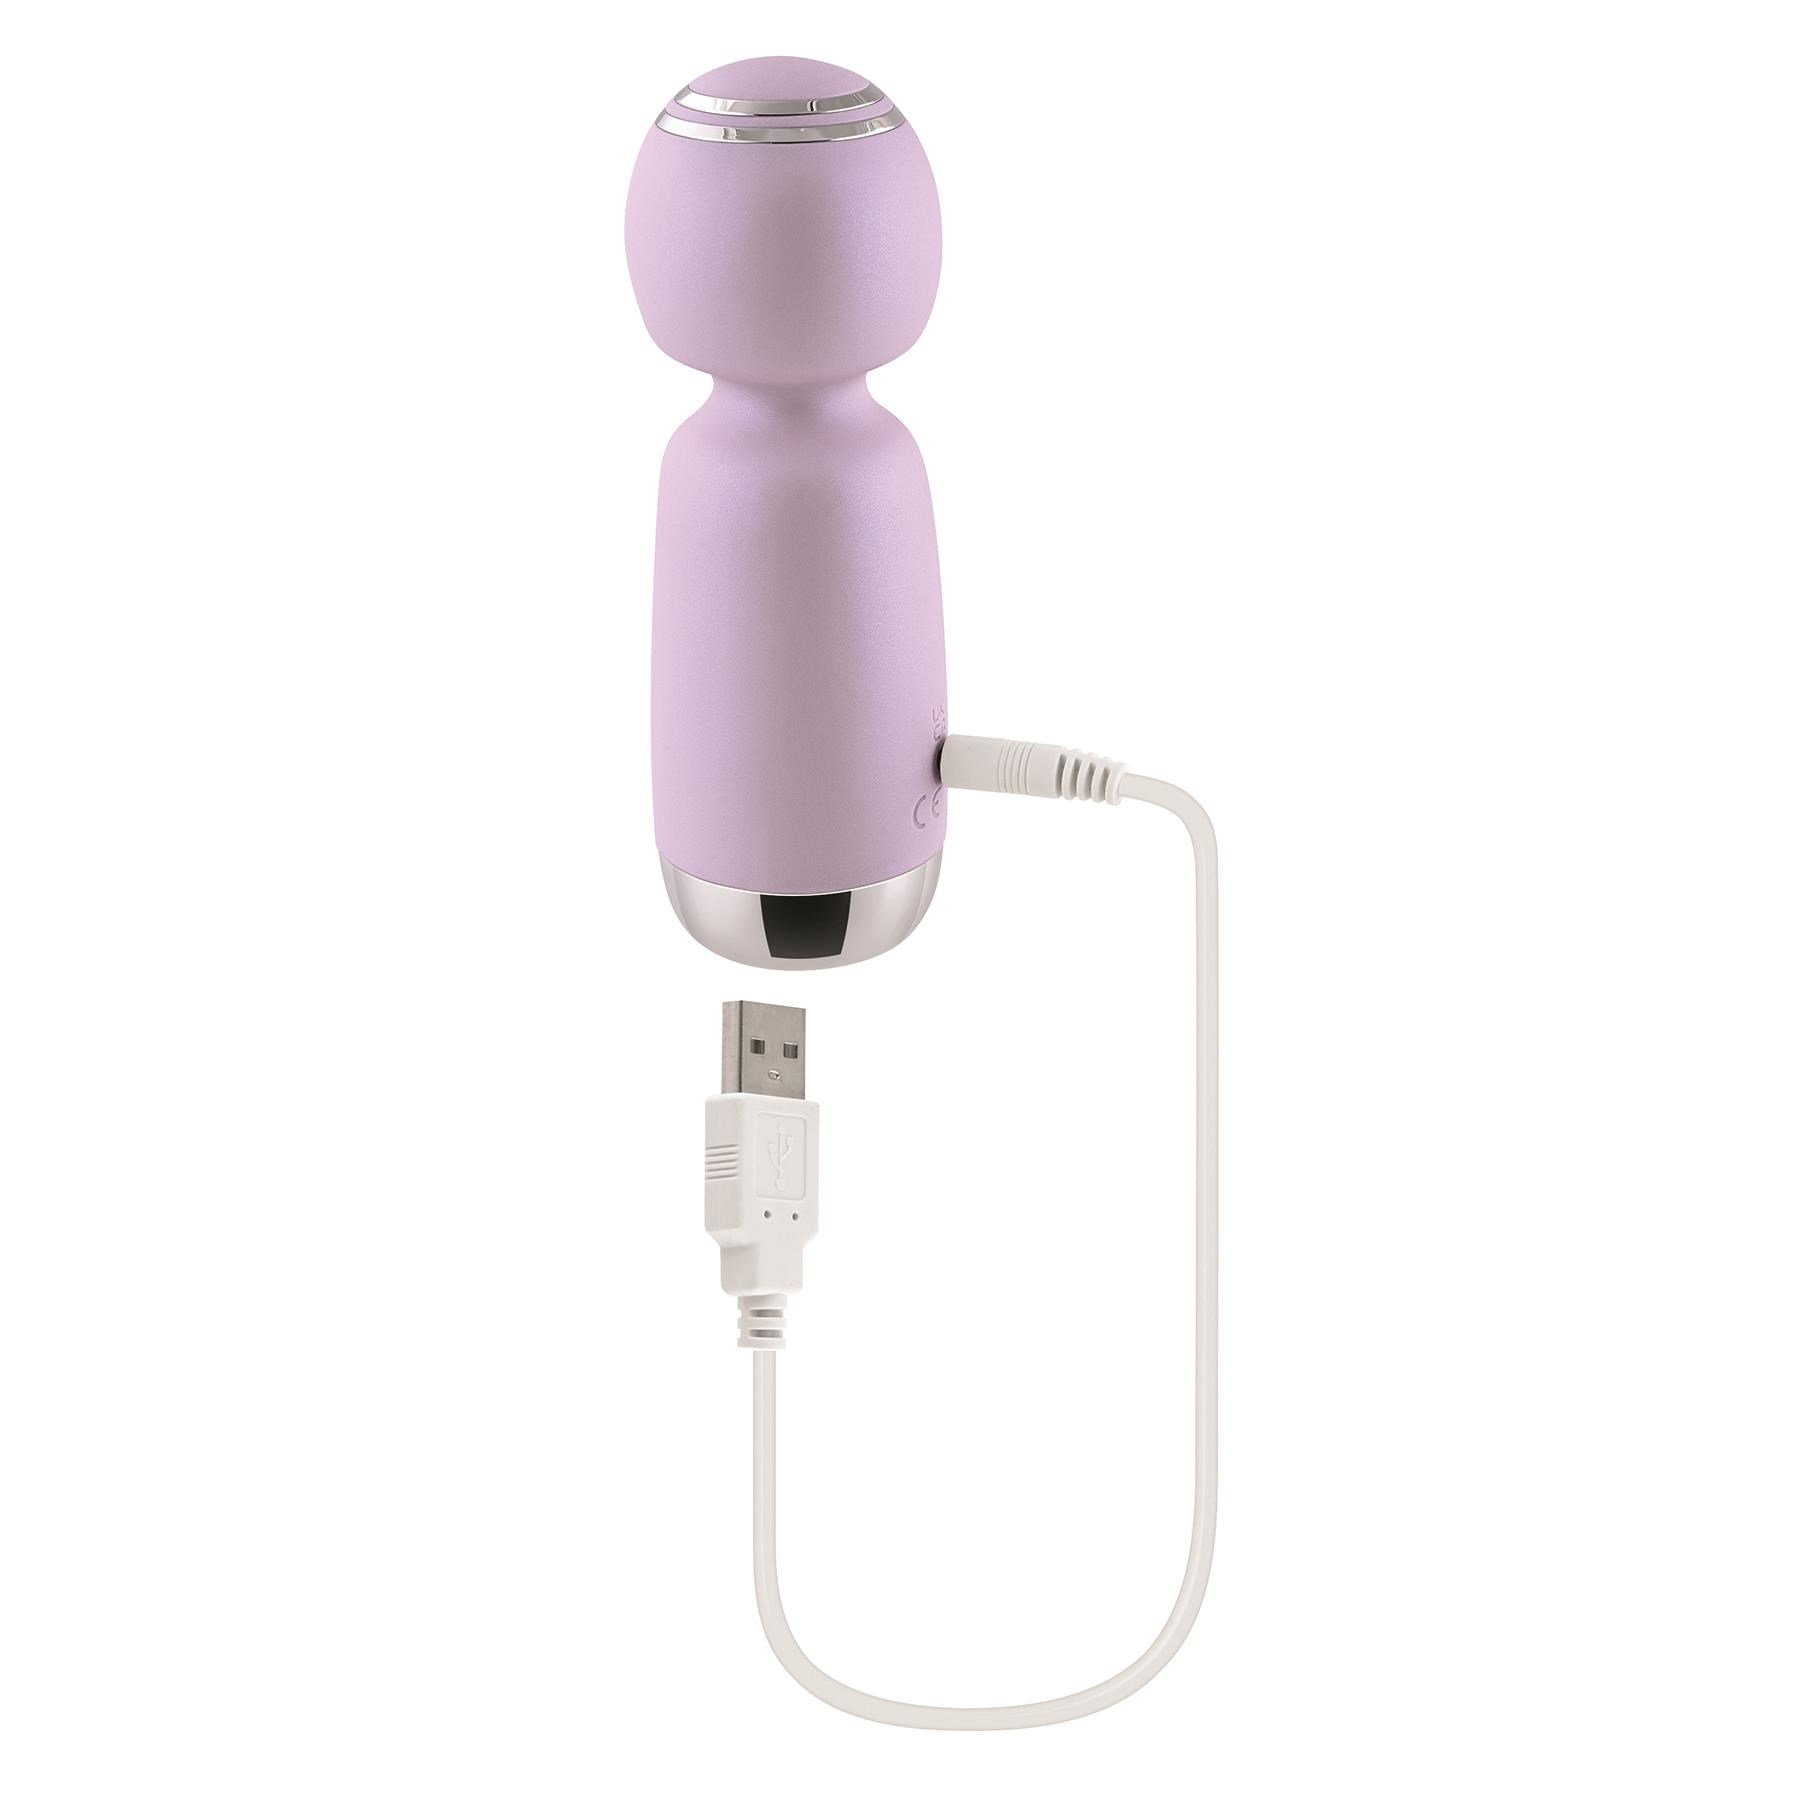 Playboy Pleasure Royal Mini Wand Massager - Product Shot Showing Where Charging Cable is Placed